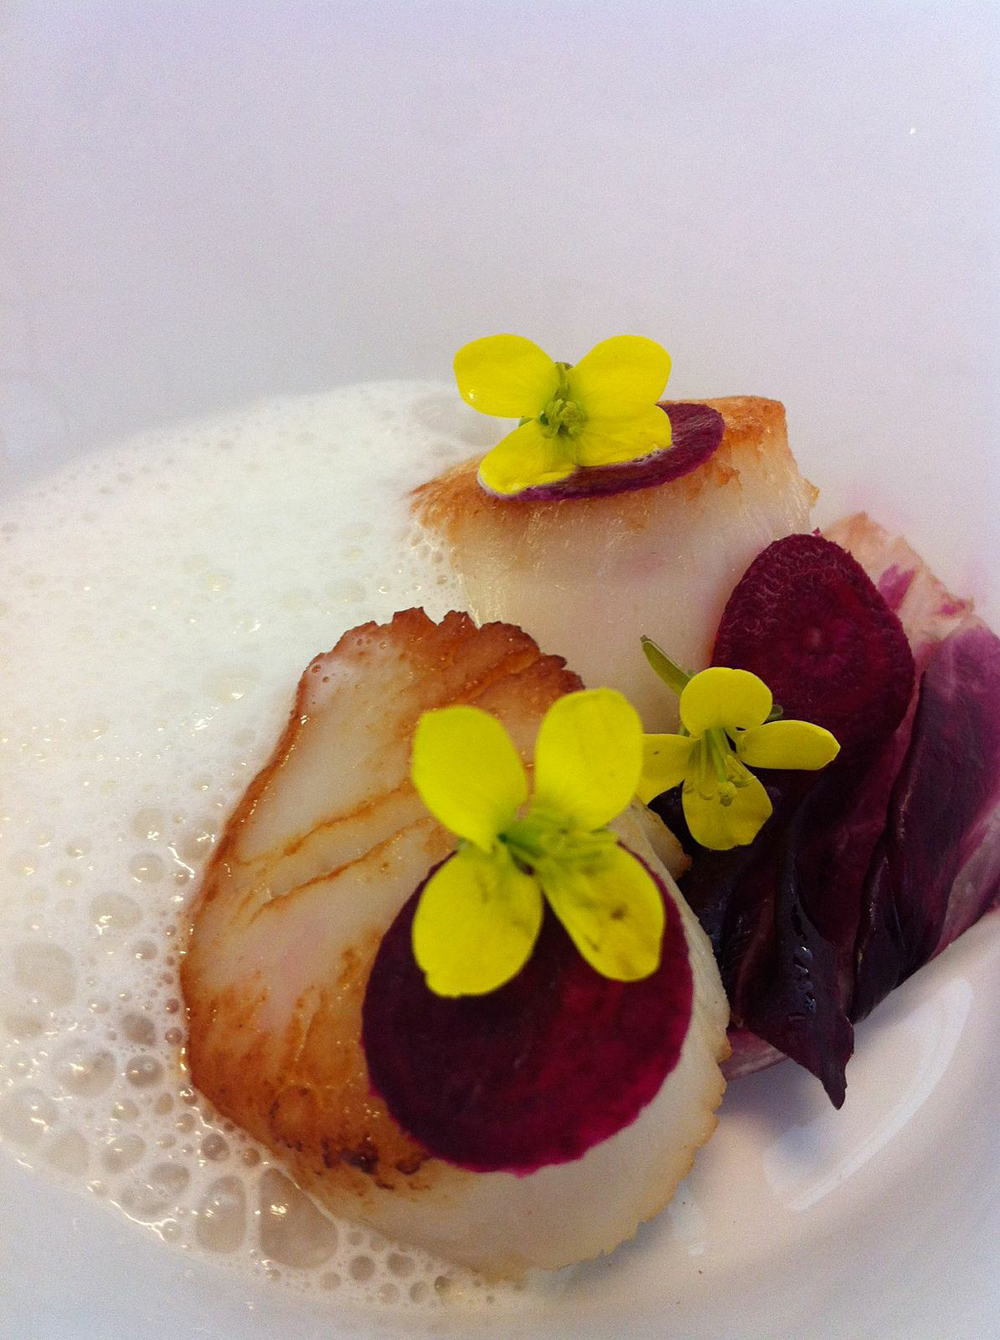 Seared Scallops with Grilled Radicchio, Shaved Beet, Truffle Parm Foam. Photo courtesy Nosh SF